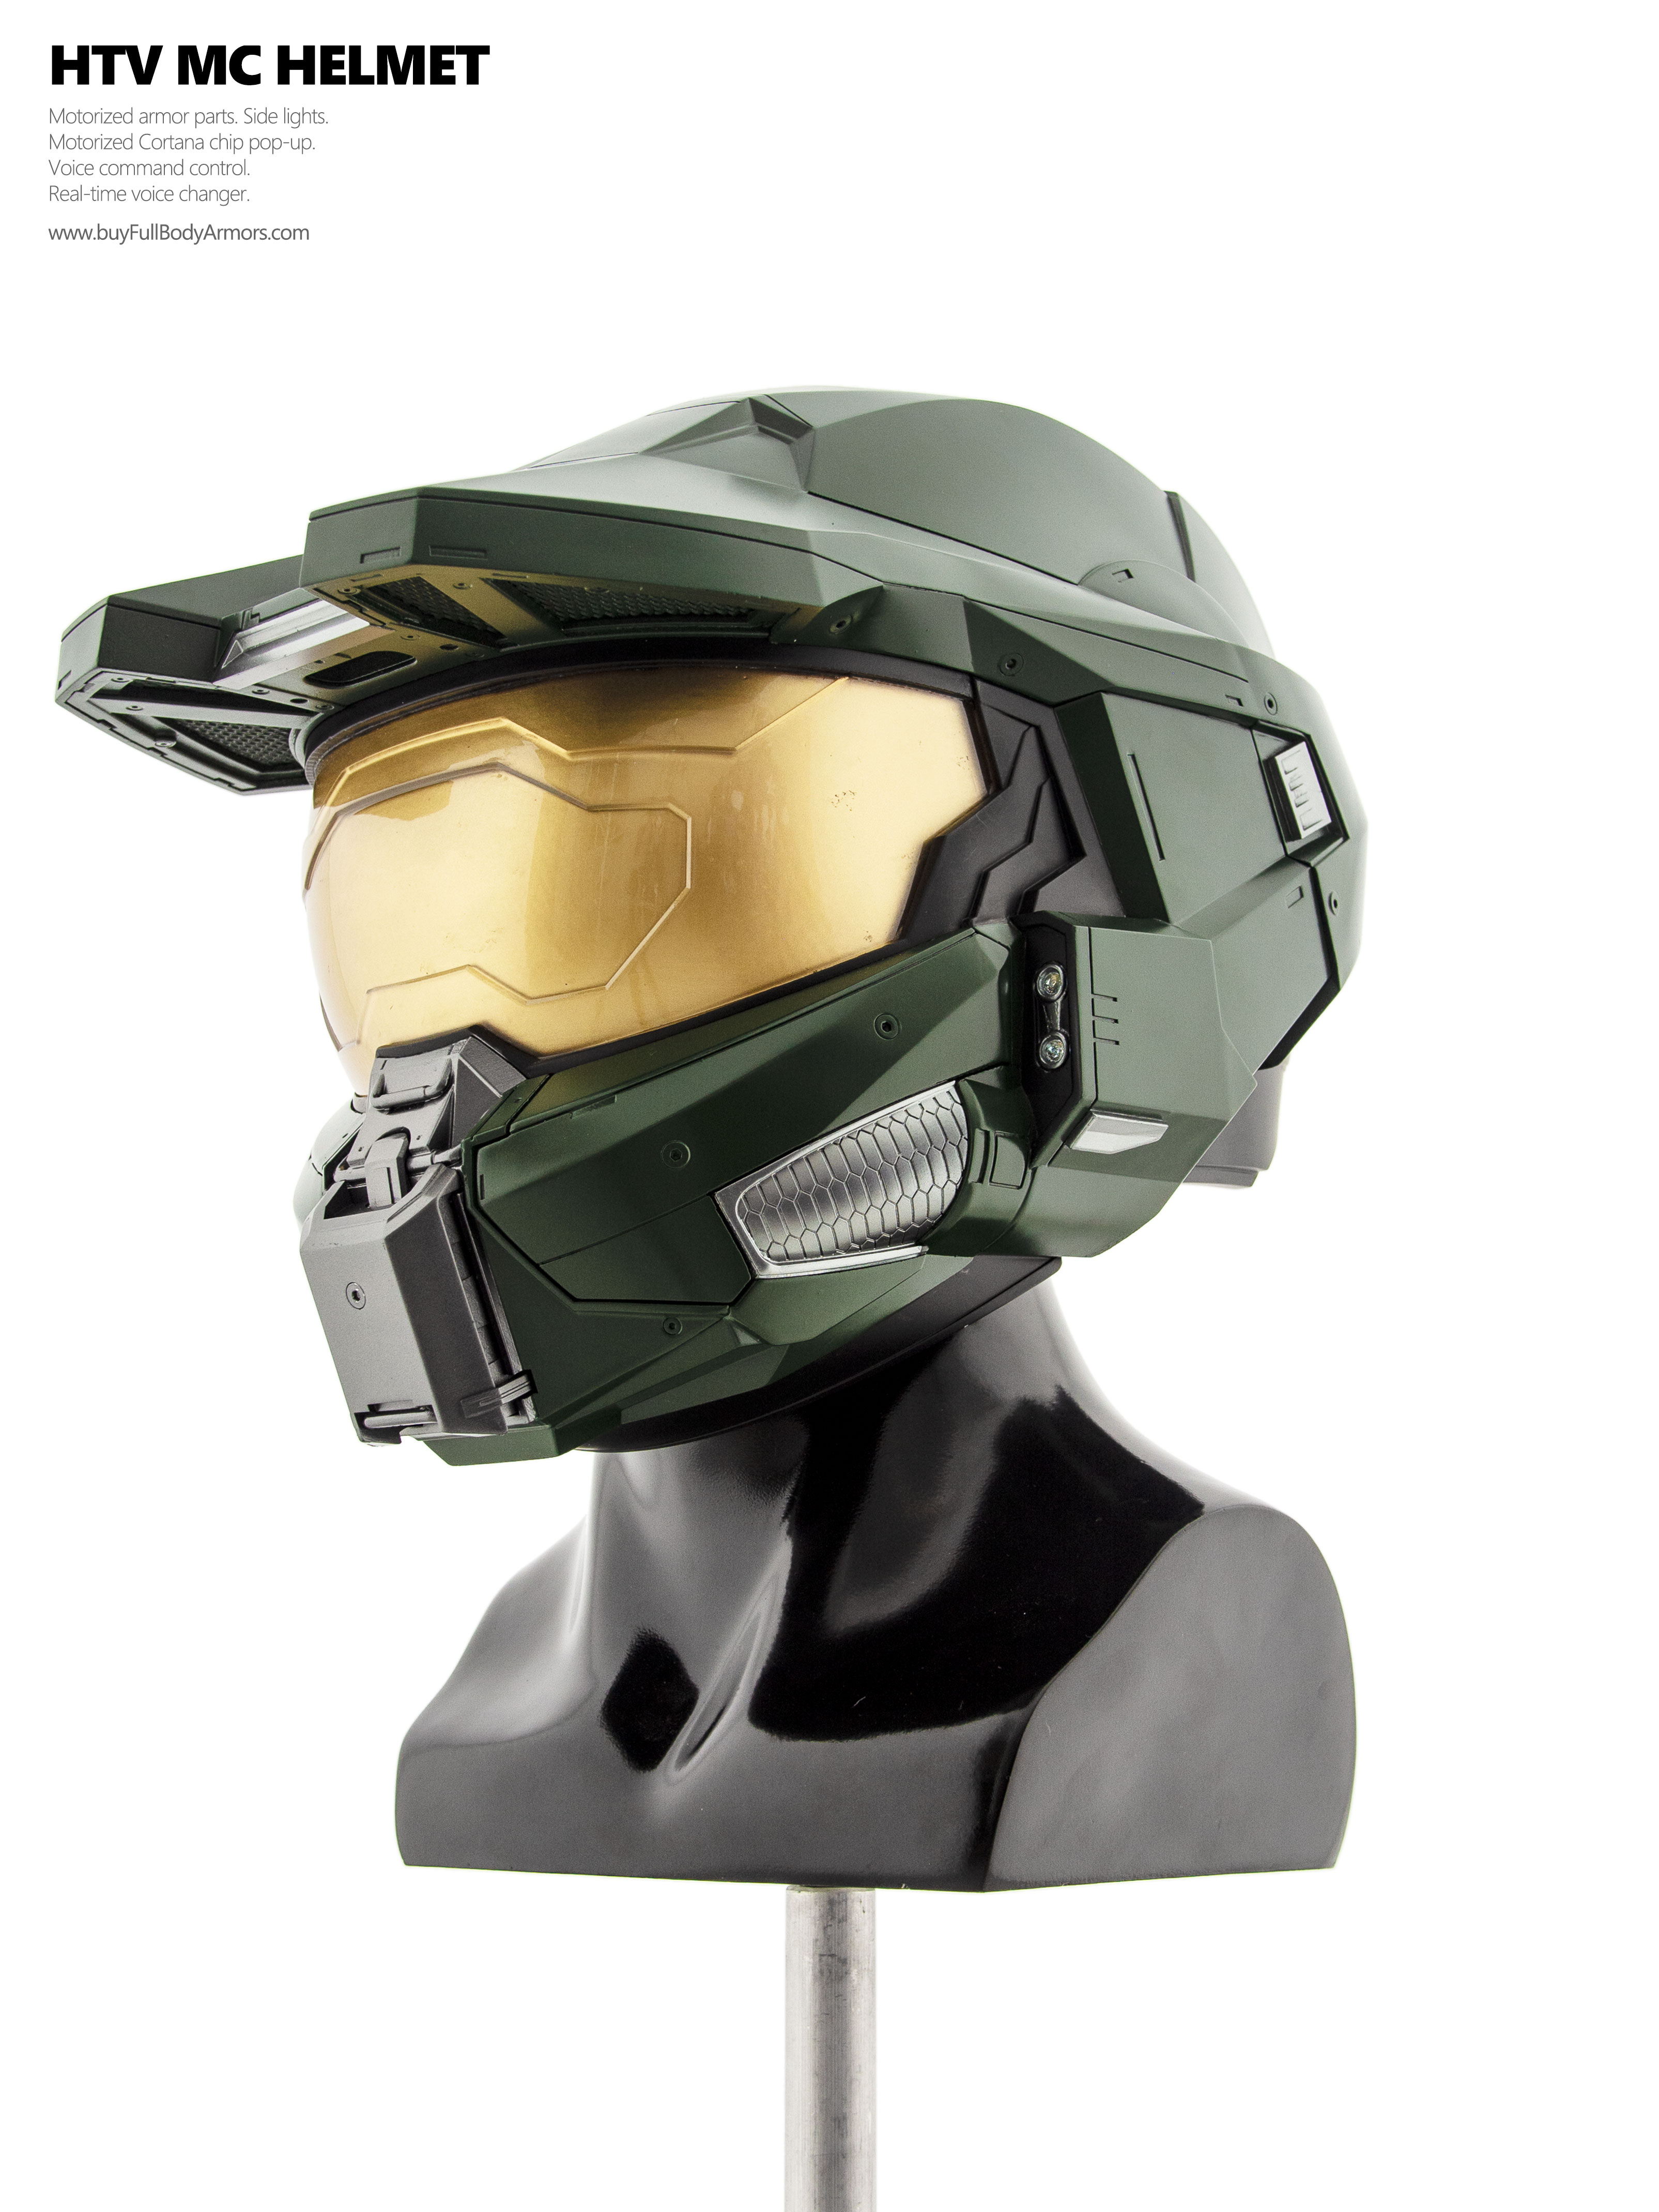 Wearable MASTER CHIEF helmet (Halo Infinity and Halo TV Series Season 2 Version) front side